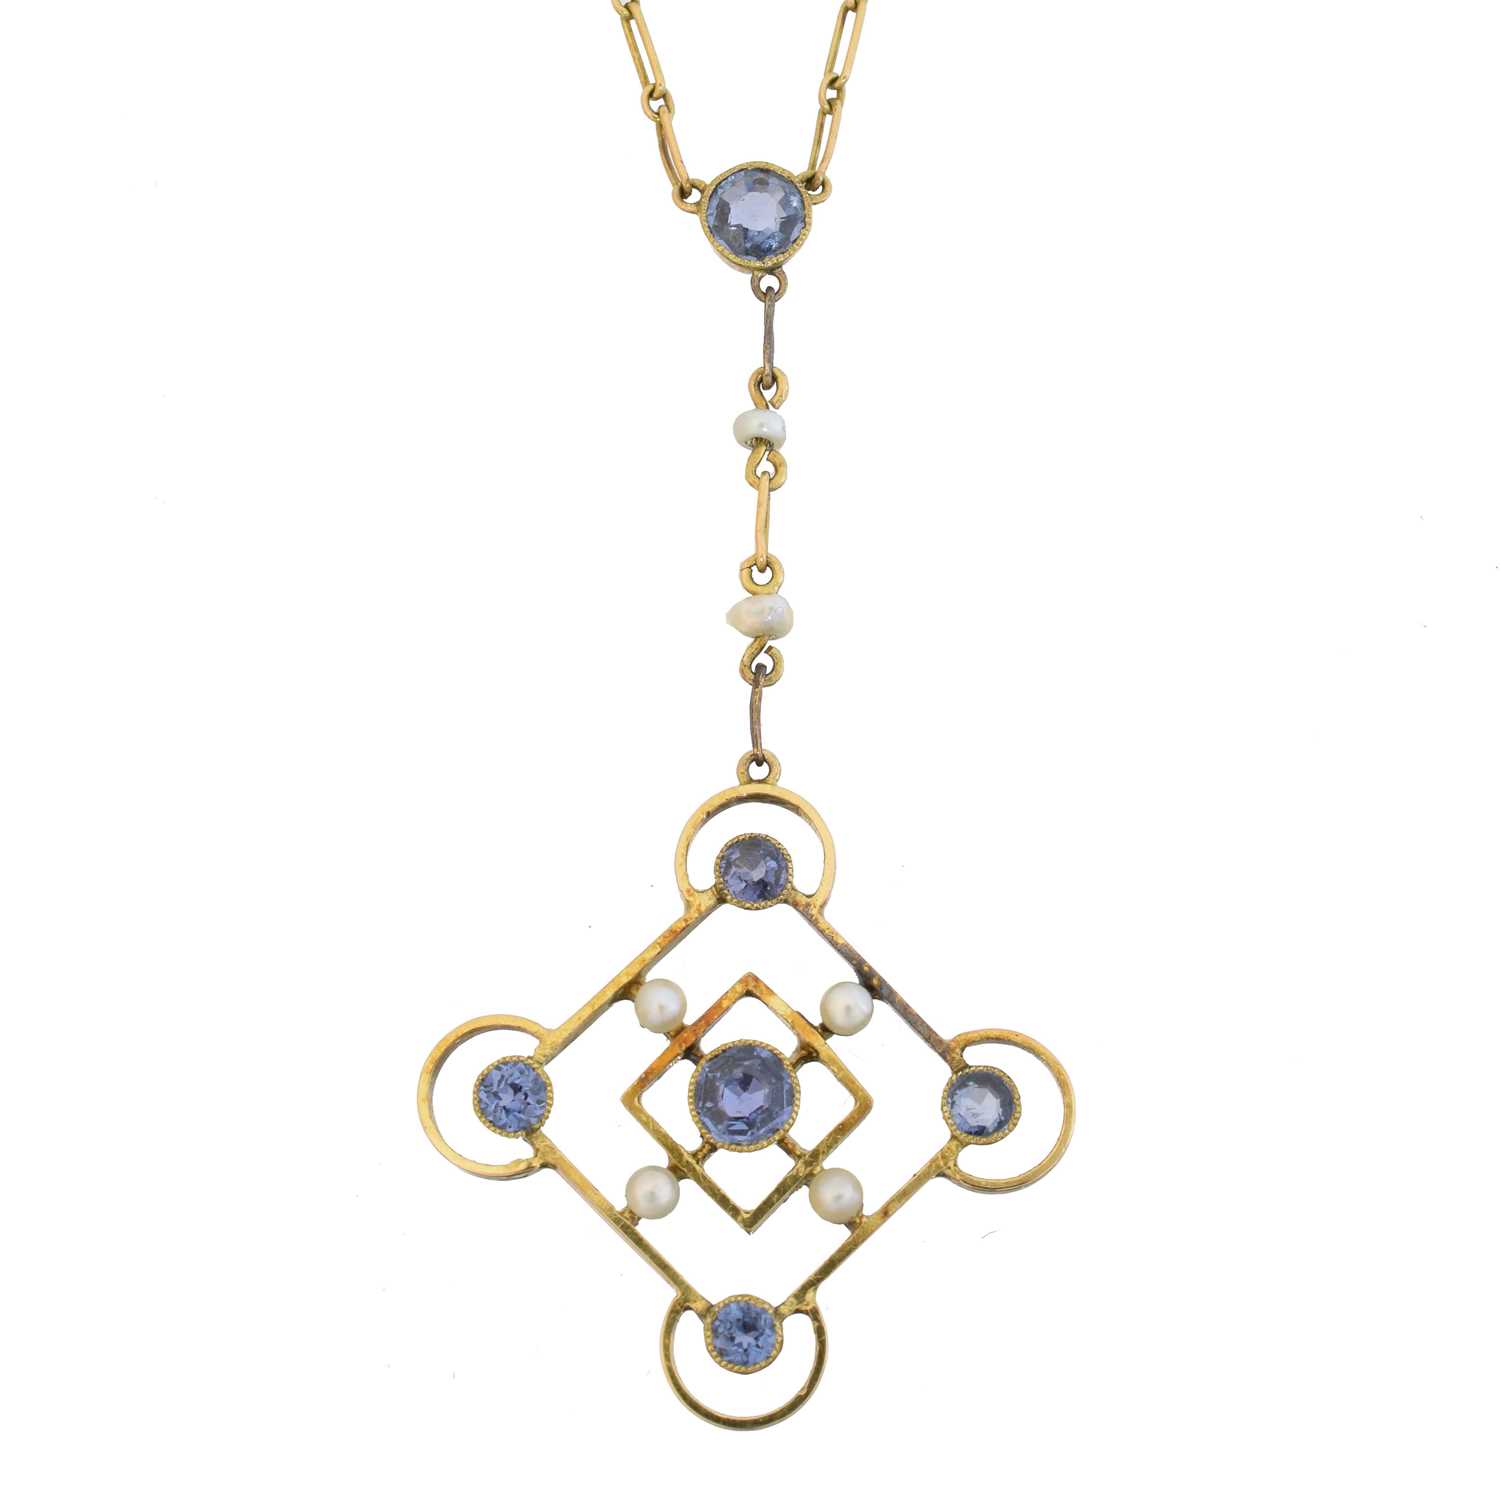 Lot 25 - An early 20th century sapphire and seed pearl necklace